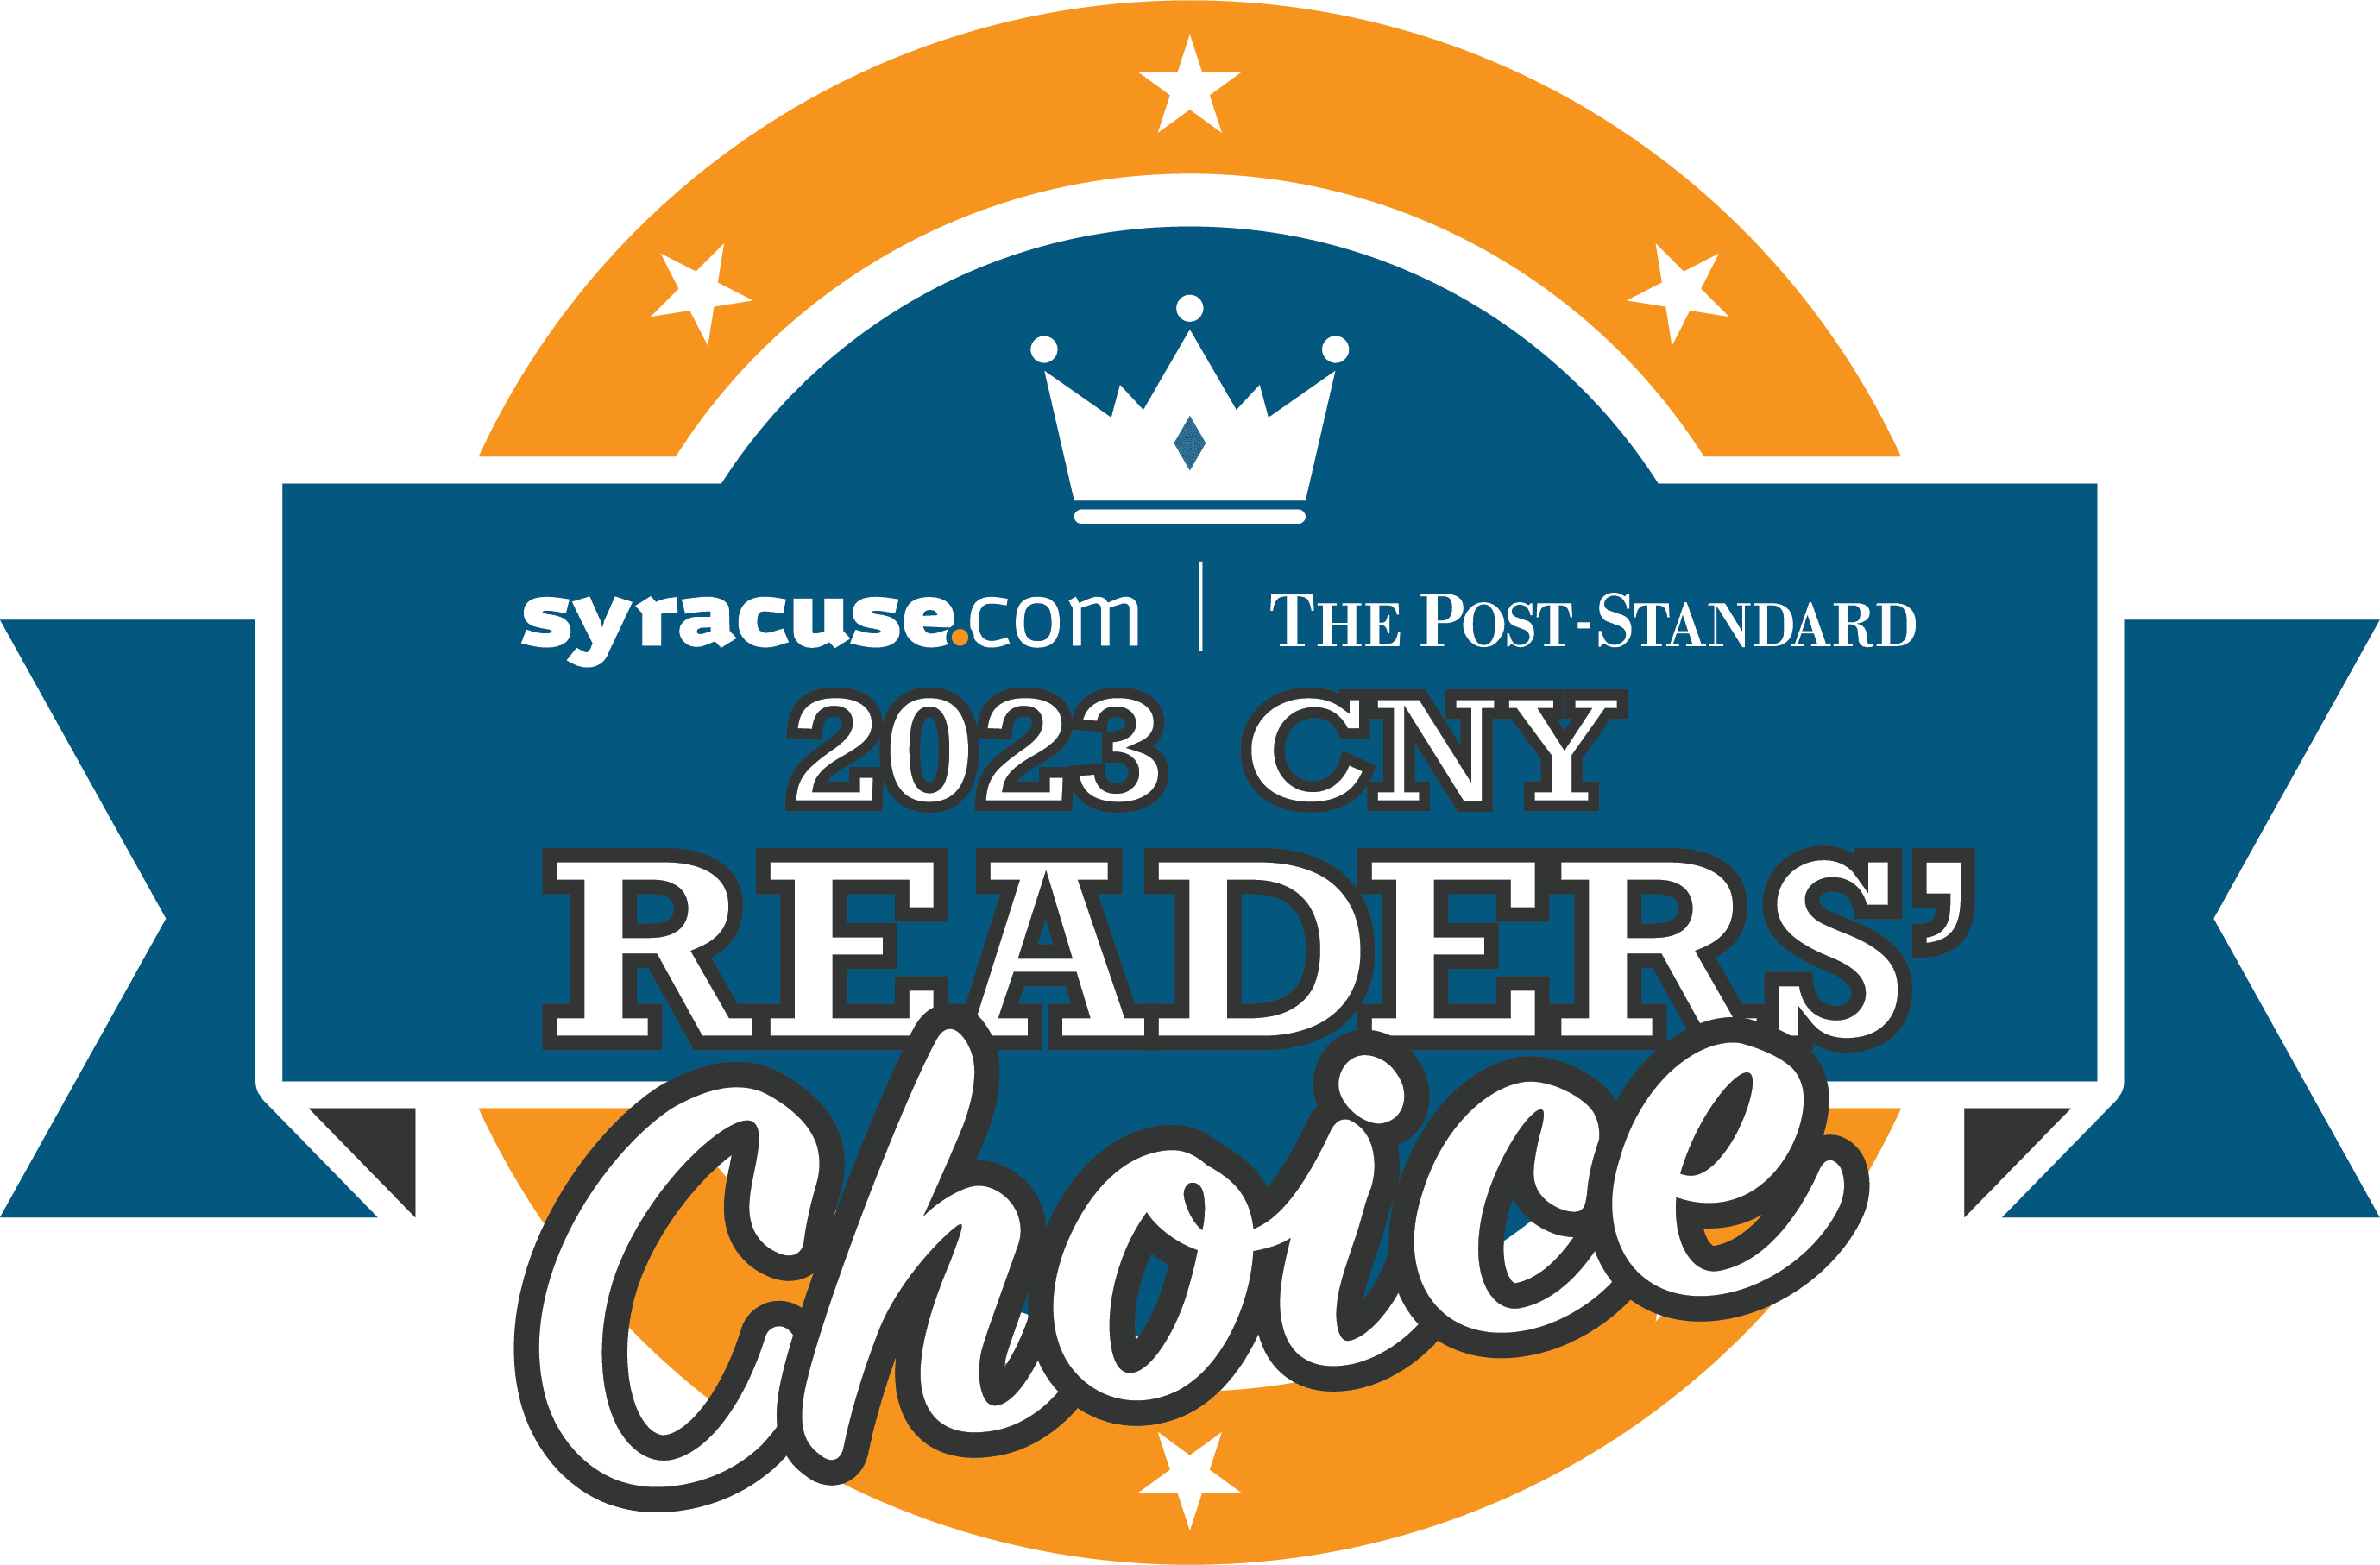 Manlius Cinema: Runner up in the 2023 Syracuse.com CNY Readers' Choice Awards for Best Entertainment Venue!